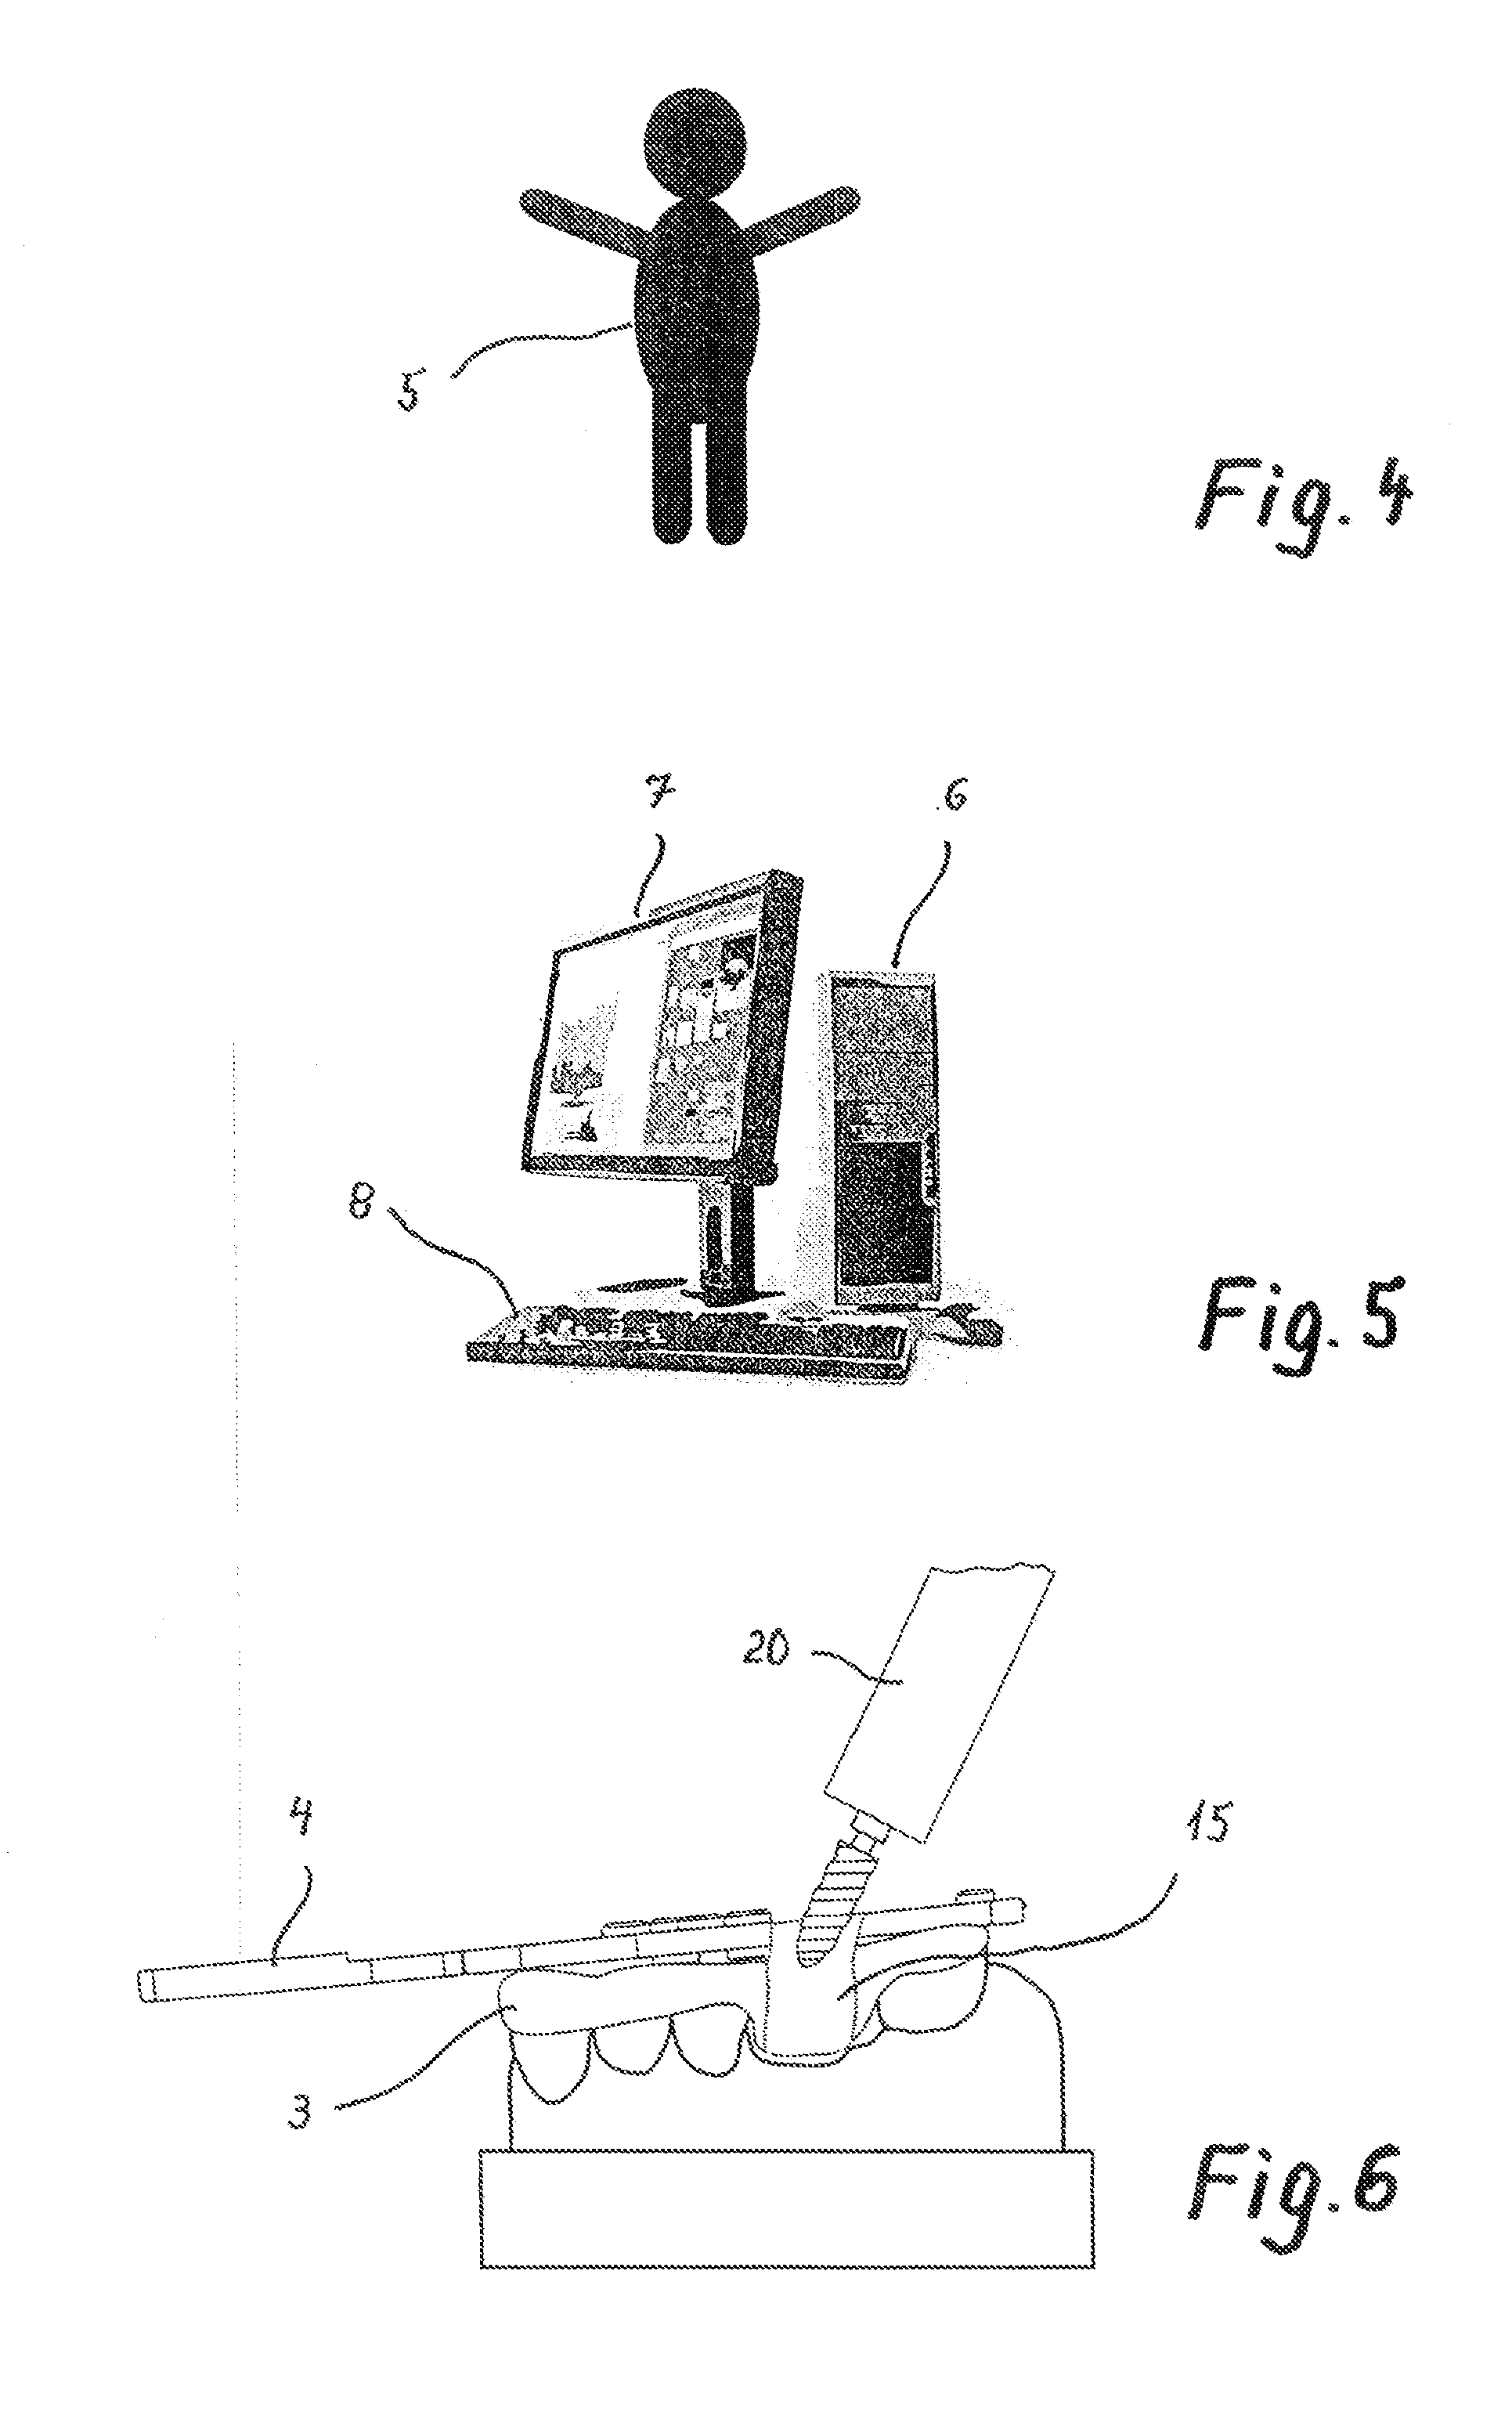 Method For Producing Individual Drilling Templates For Dental Implant Surgery In A Patient's Jawbone